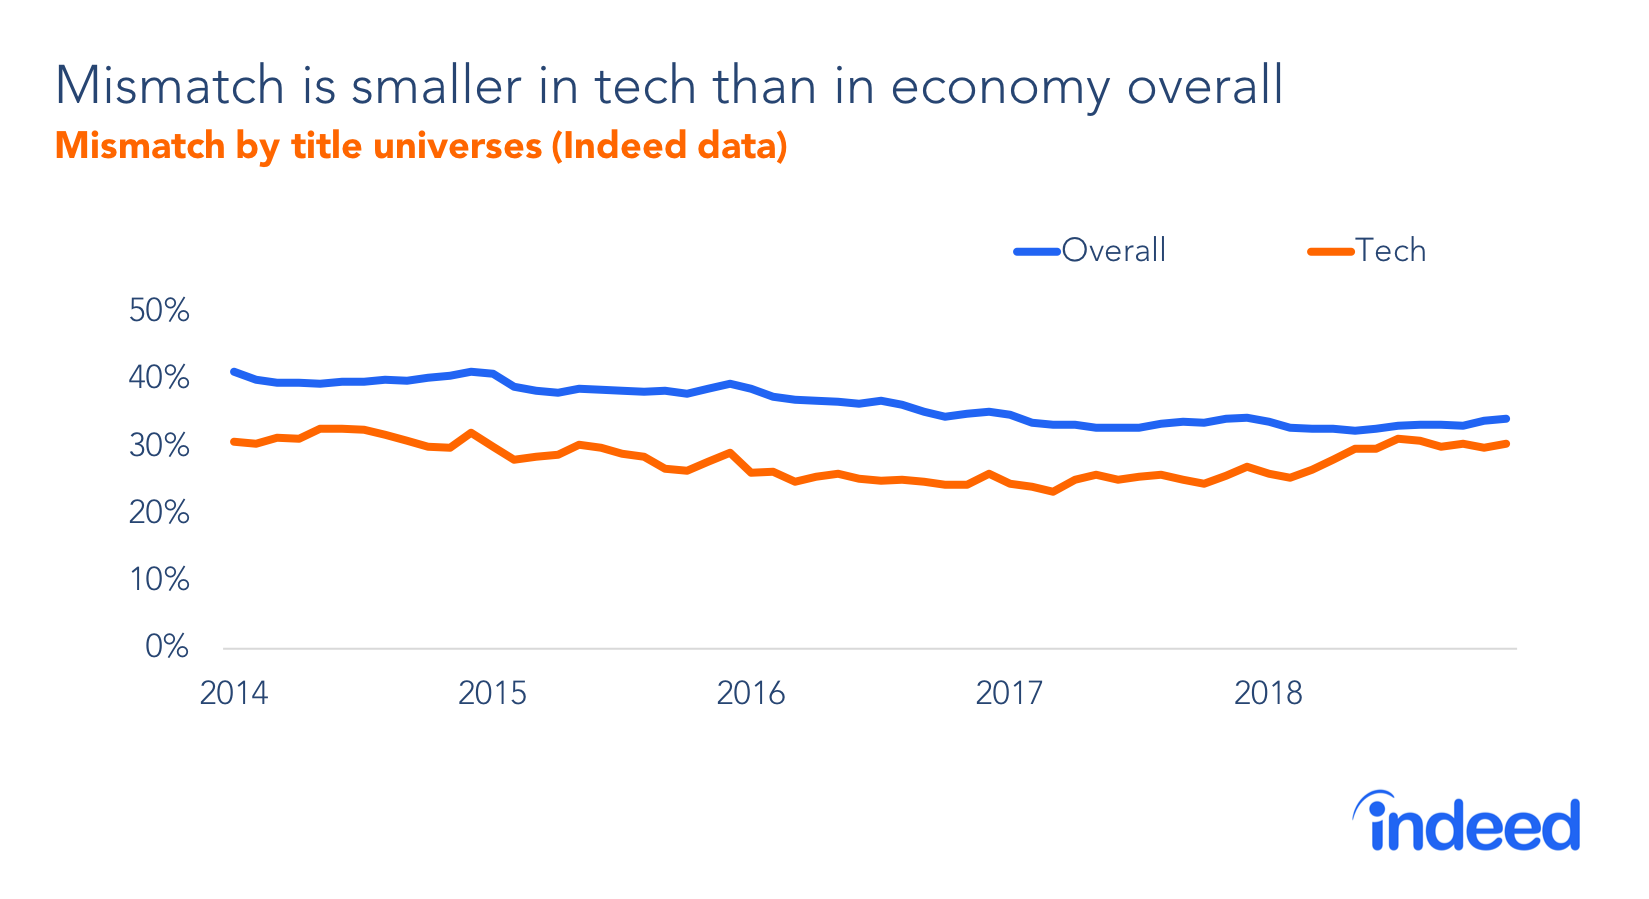 Mismatch is smaller in tech than in economy overall